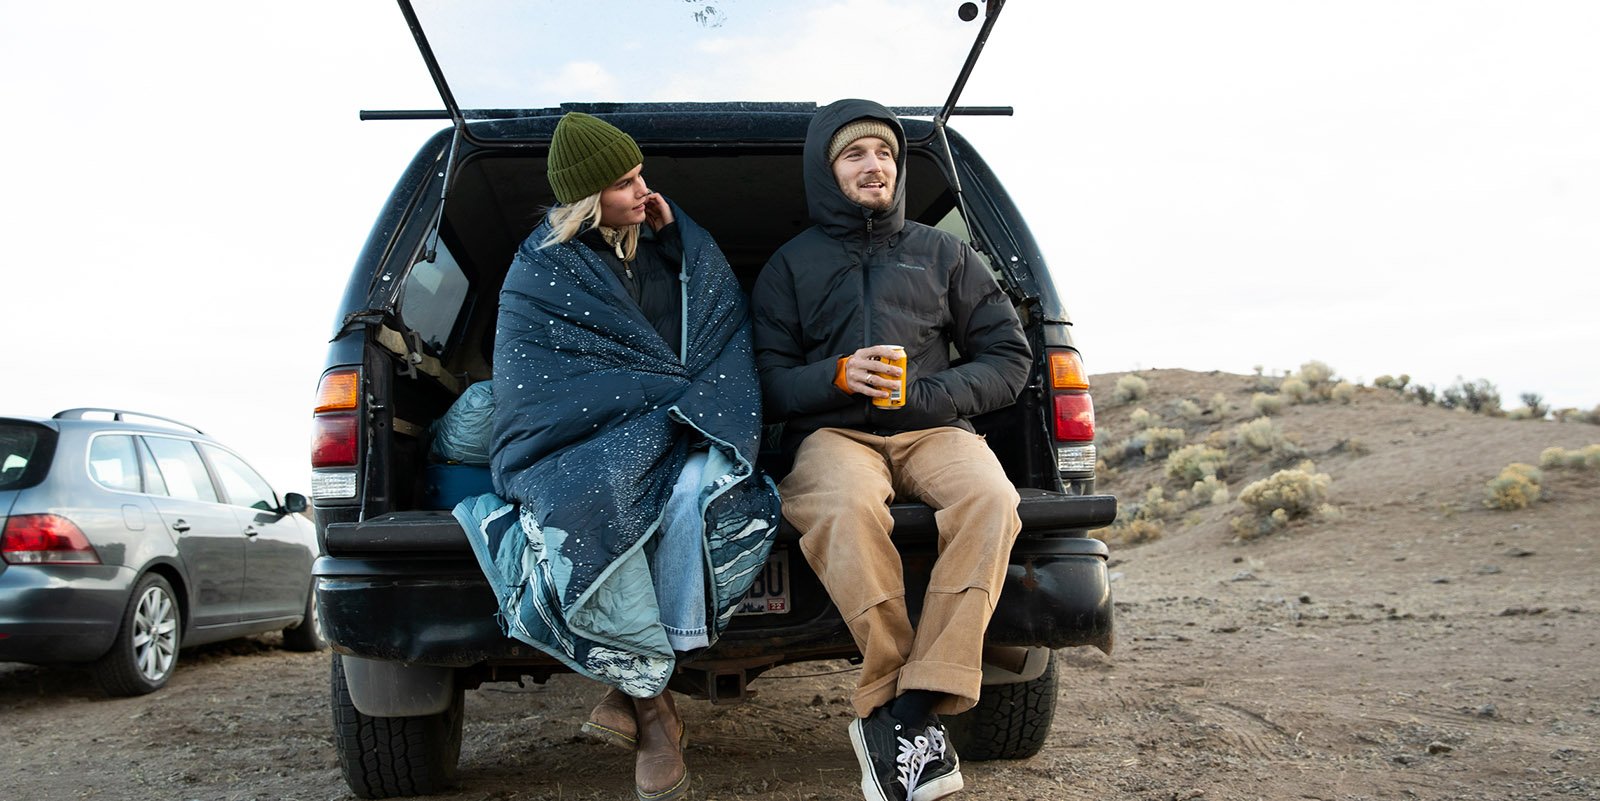 Car Camping Gear for Every Budget - The Trek